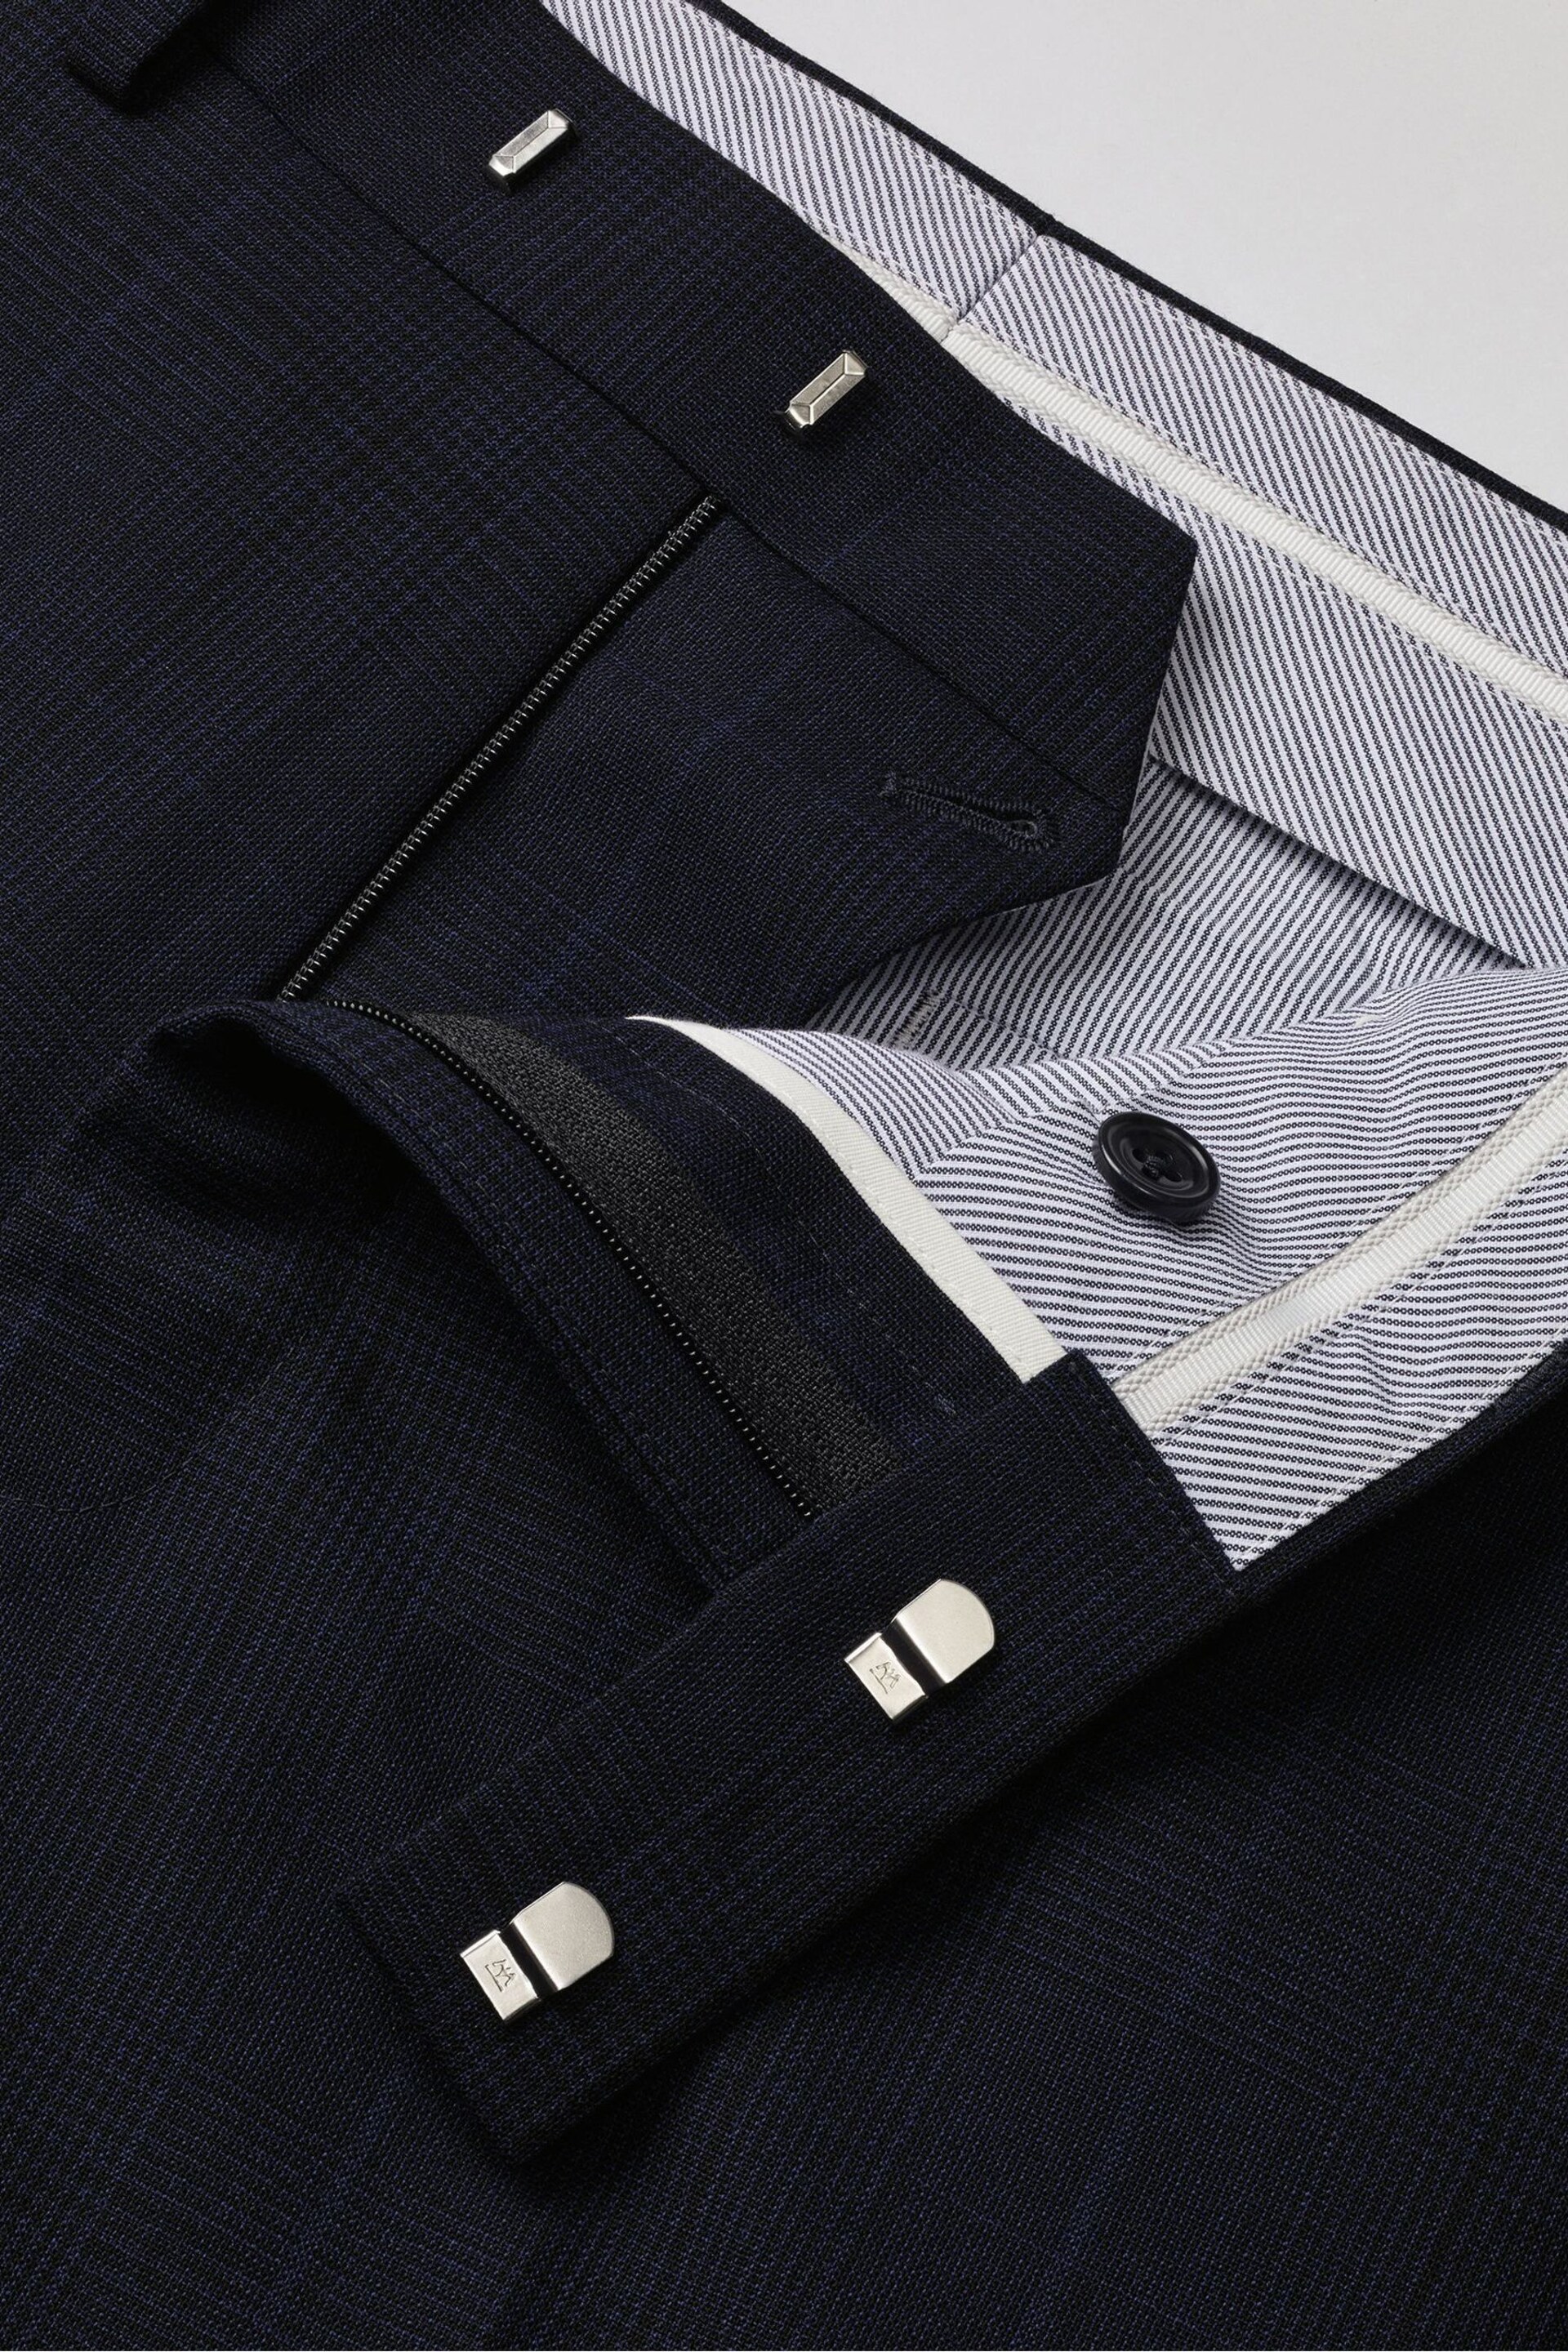 Charles Tyrwhitt Blue Slim-Fit Prince of Wales Ultimate Performance Suit Trousers - Image 3 of 3